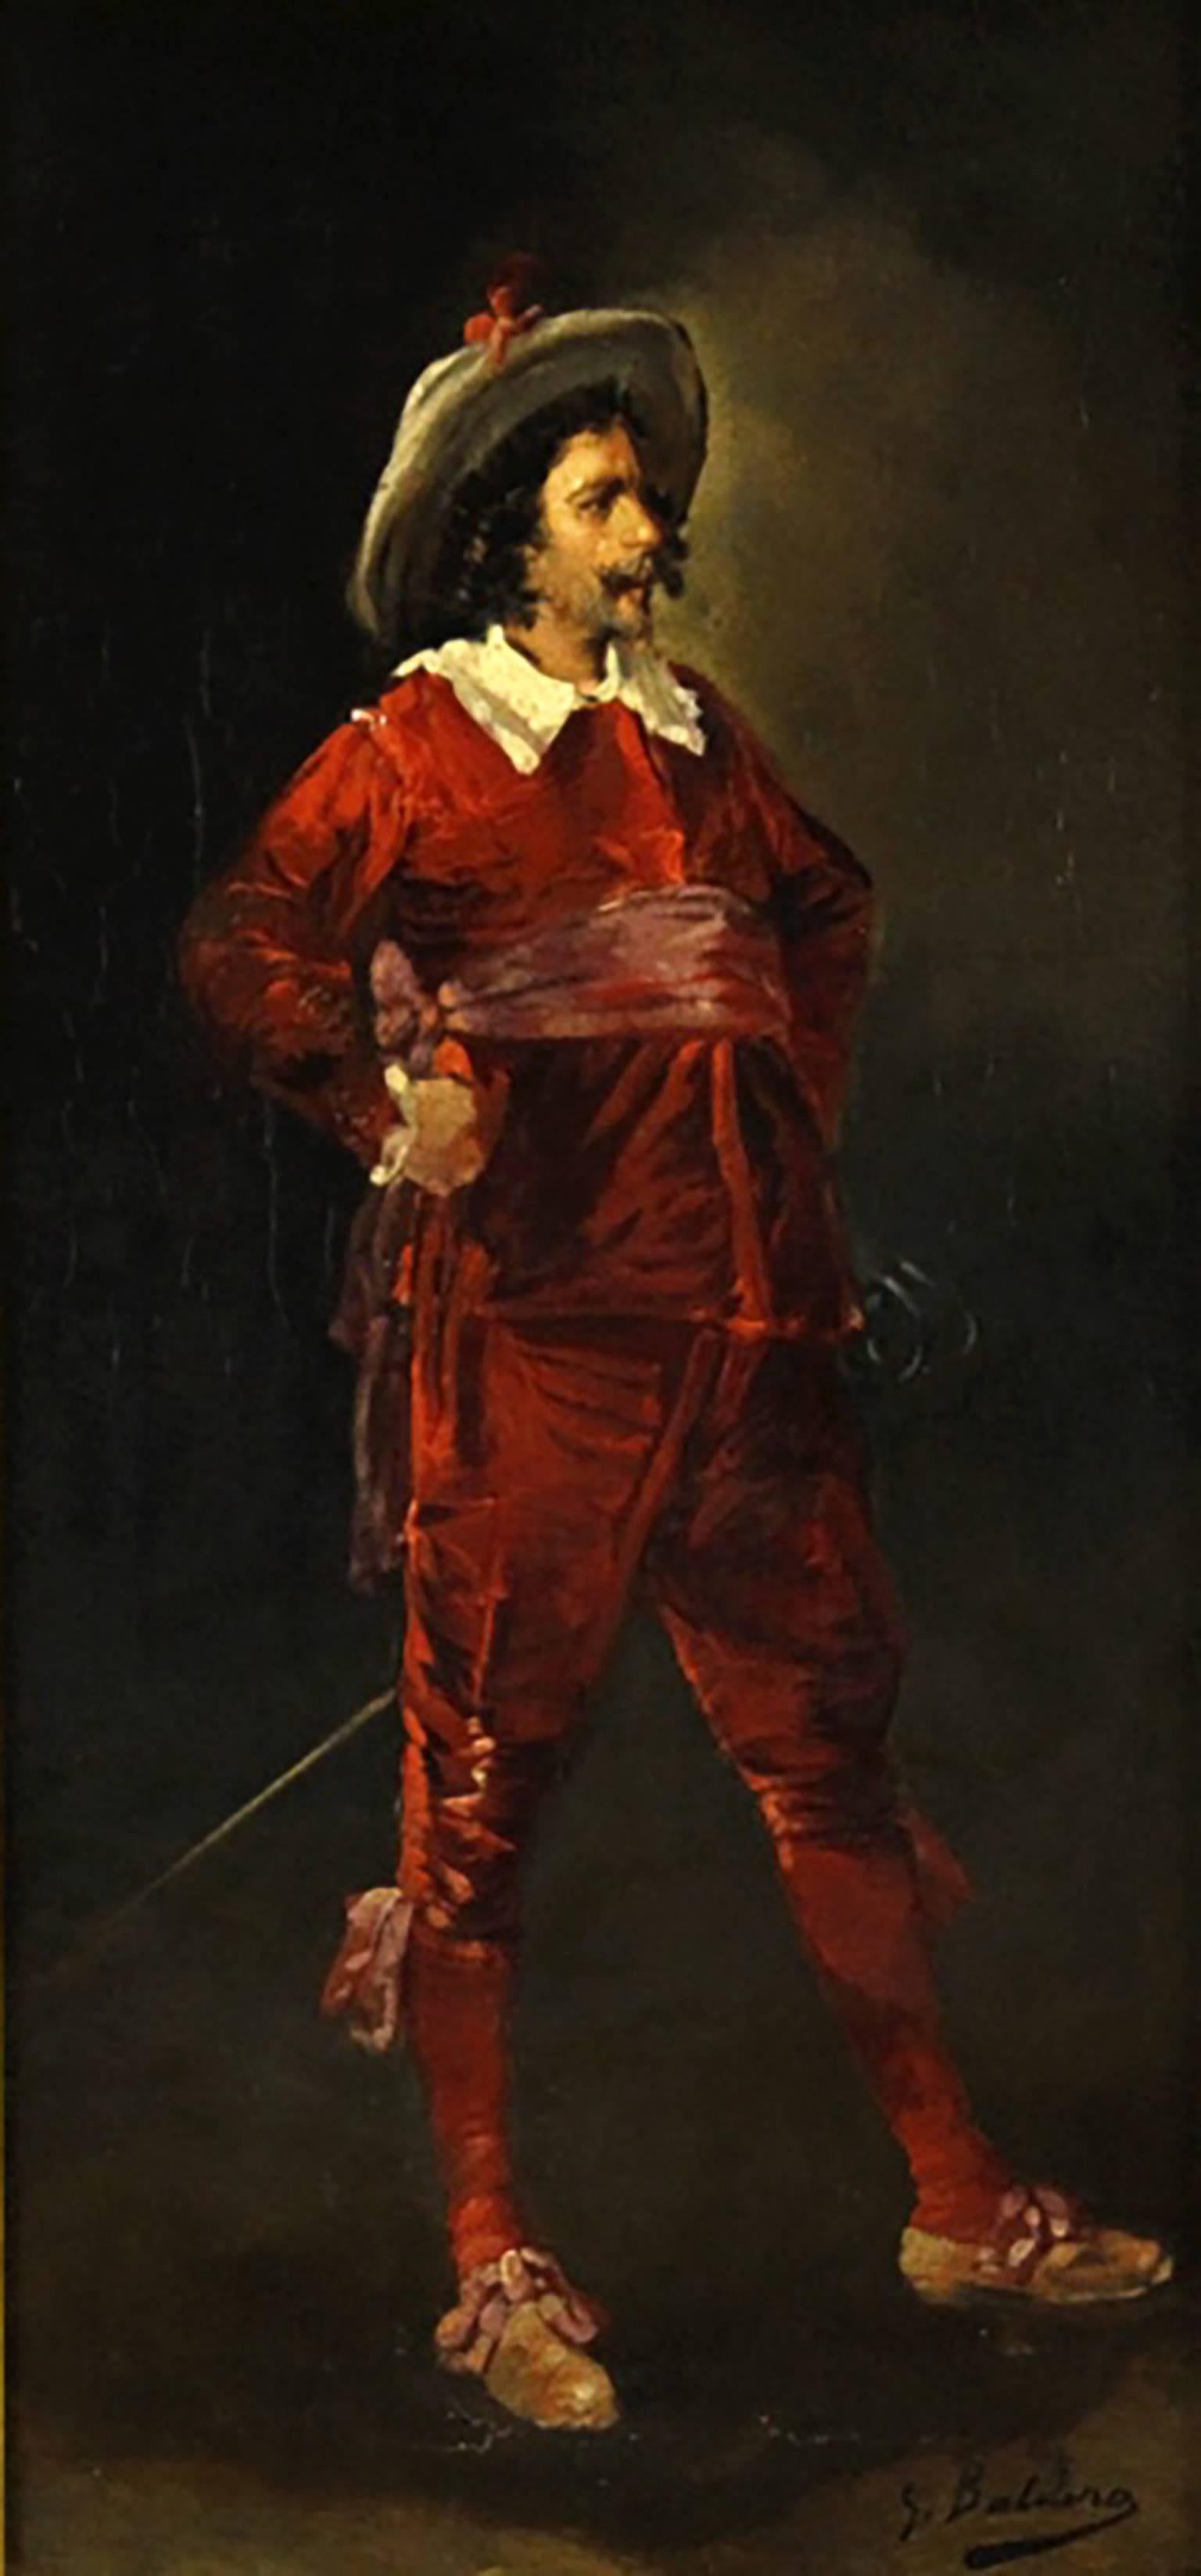 Wonderful Antique oil painting by Luigi Giorgio Baldero (Italy, 19th Century)   Painting is a portrait of a French Cavalier in Fine Scarlet Uniformed Attire  Baldero’s unique painting style and attention to detail make this a wonderful genre